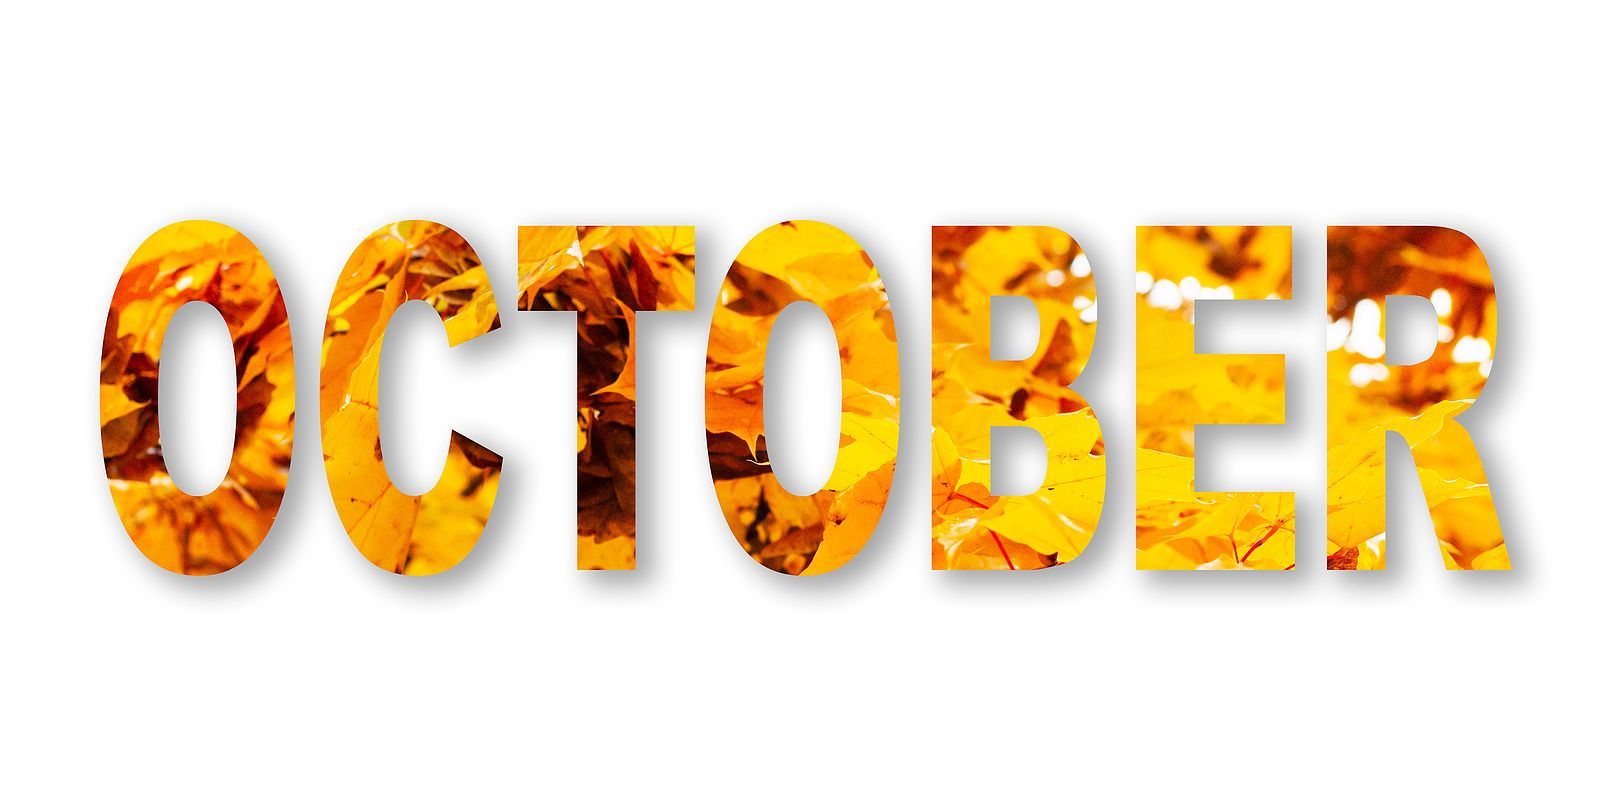 Bold text "OCTOBER" with letters filled in with fall colored leaves.